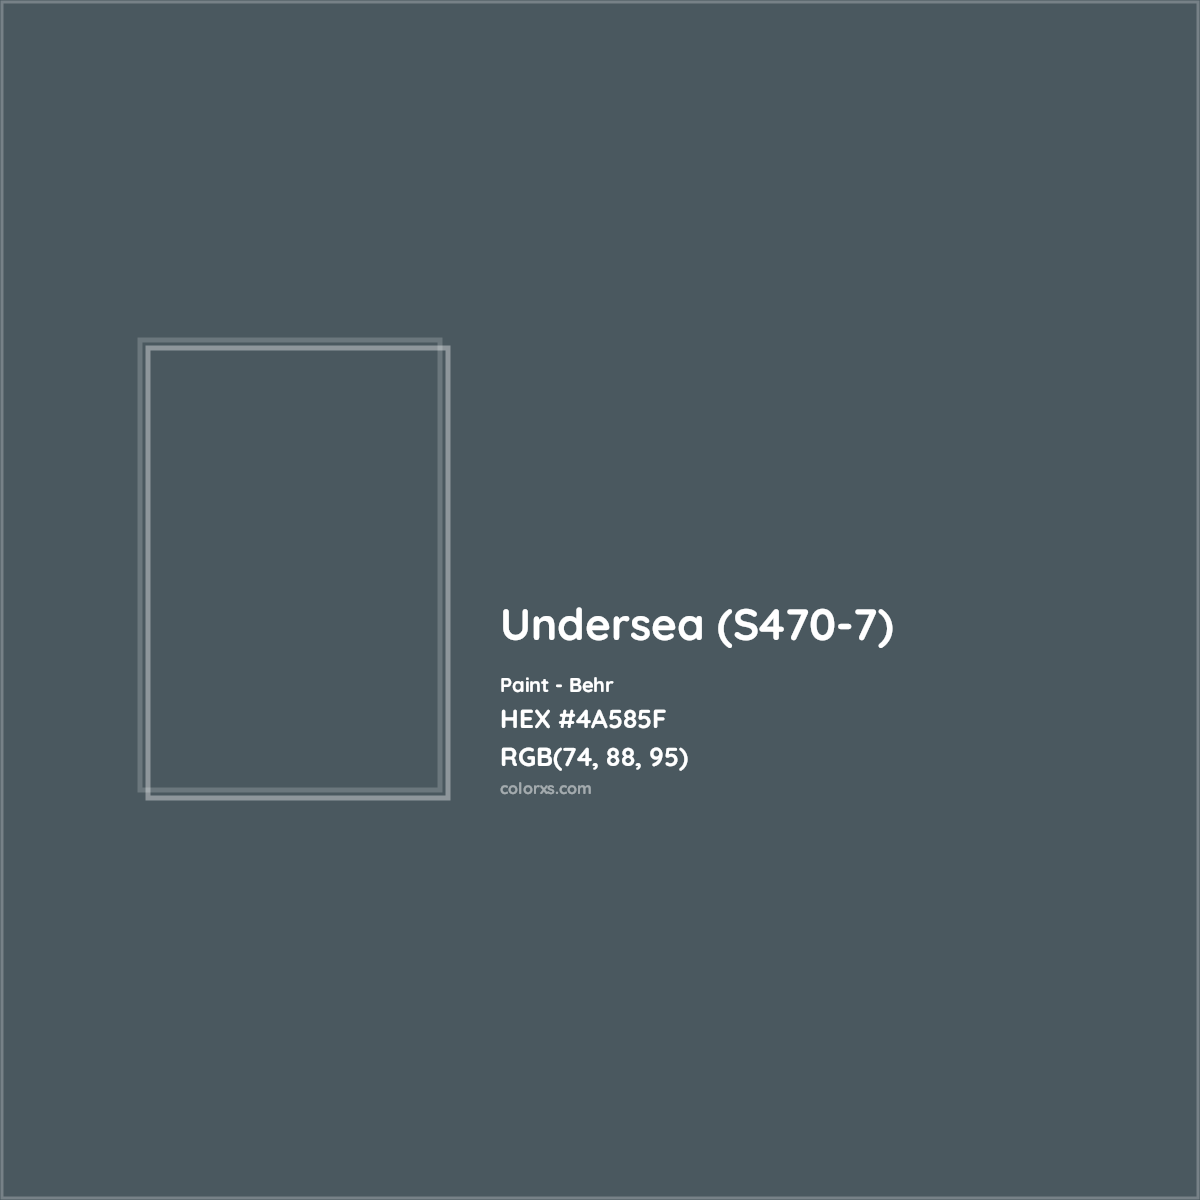 HEX #4A585F Undersea (S470-7) Paint Behr - Color Code